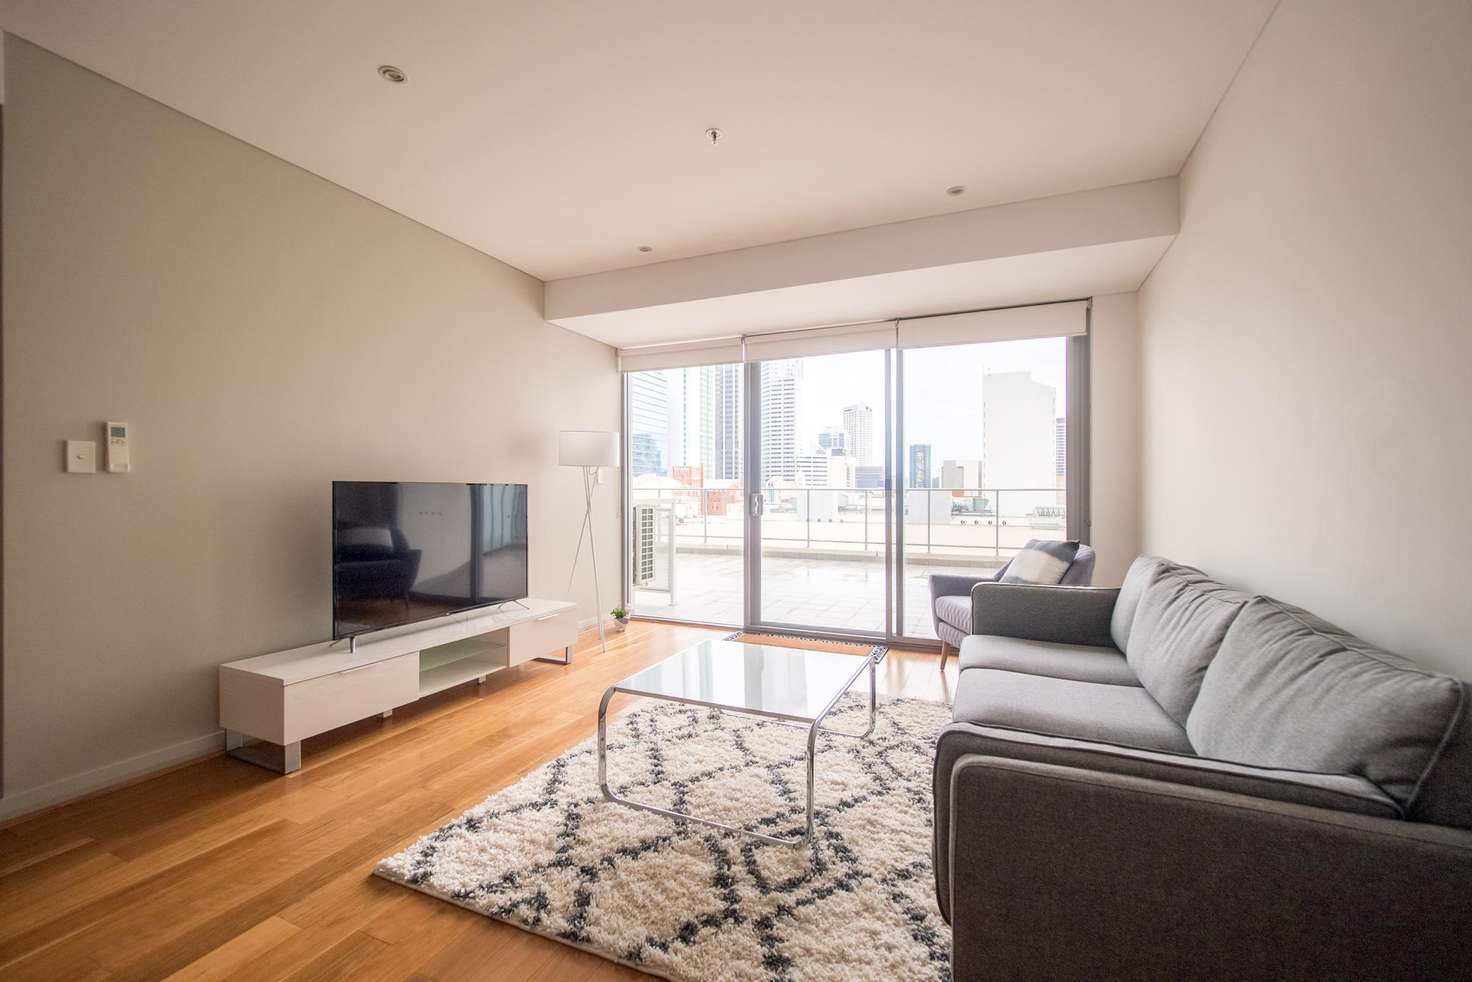 Main view of Homely apartment listing, 5/580 Hay Street, Perth WA 6000